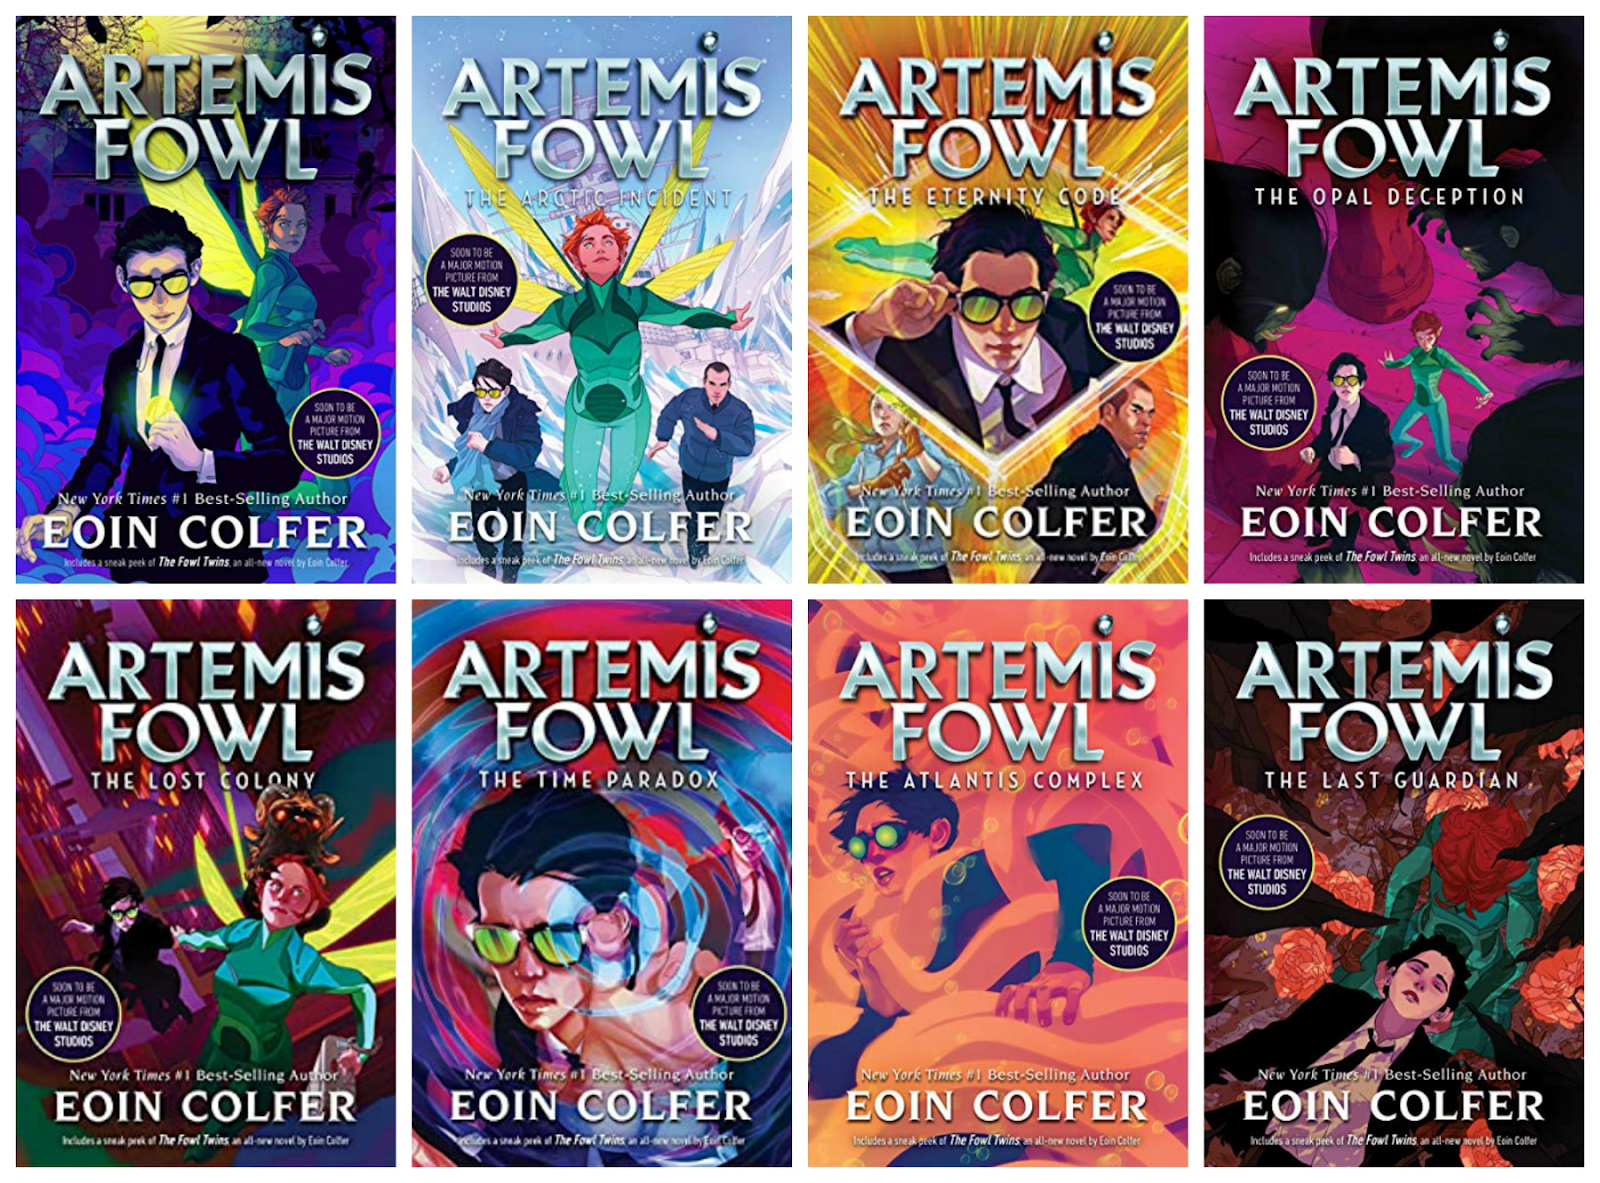 Artemis Fowl: The Last Guardian by Eoin Colfer, Paperback